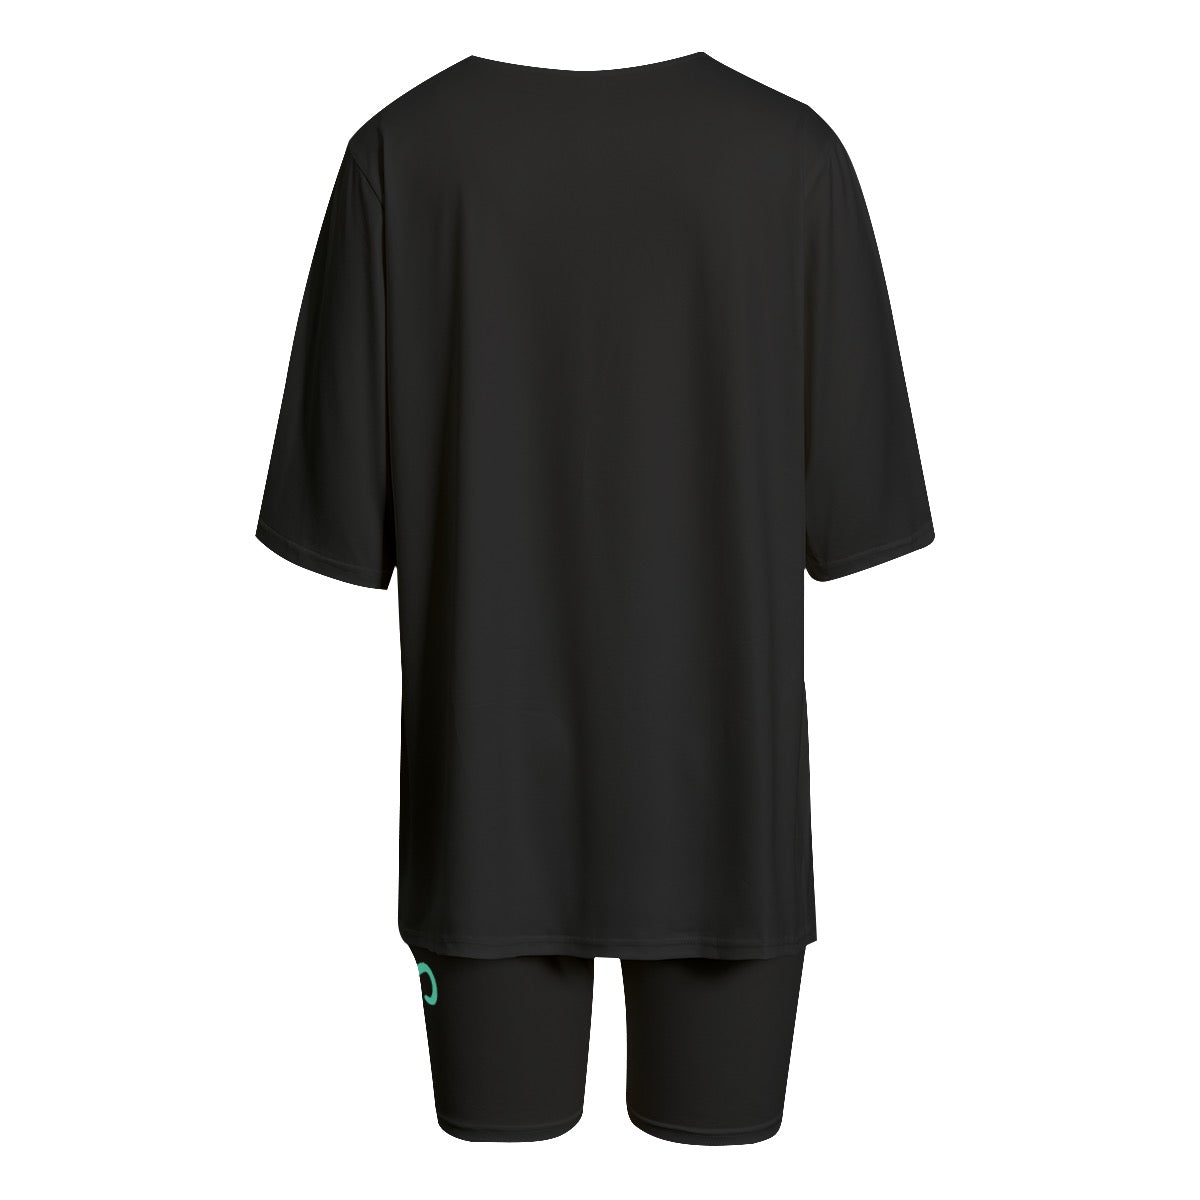 Officially Sexy Black Women's T-shirt Set With Short Sleeves and Turquoise Green Logos